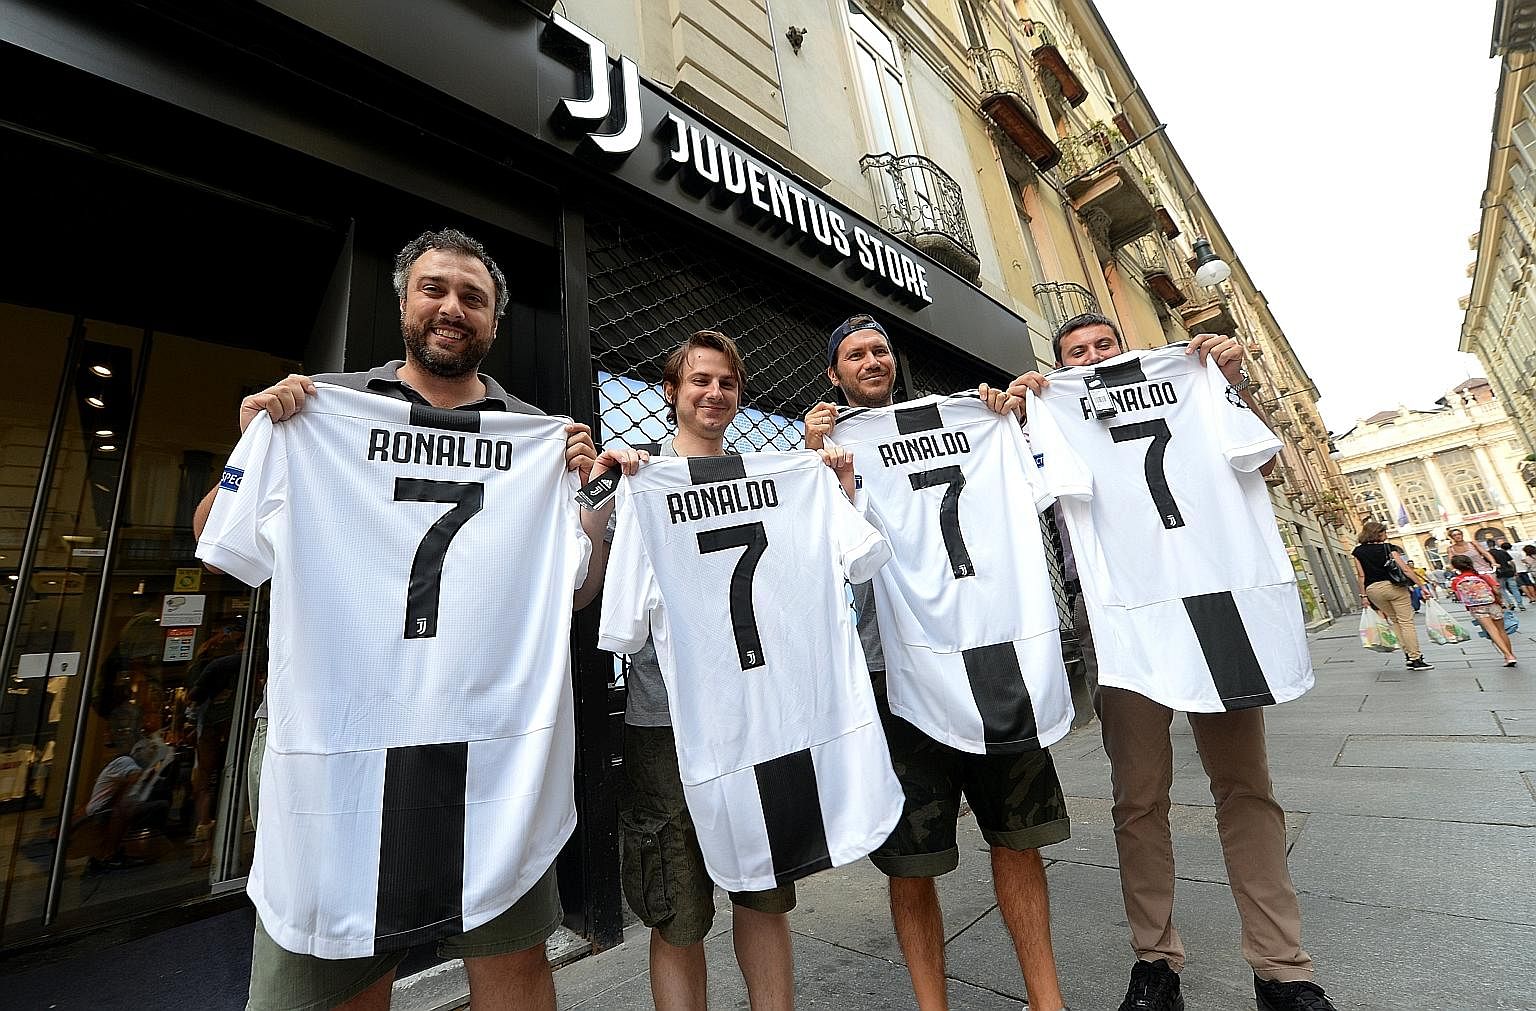 Juventus supporters posing with club shirts that have been adorned with the name and number of Cristiano Ronaldo after his €100 million (S$160 million) transfer from Real Madrid to the Italian champions on Tuesday.